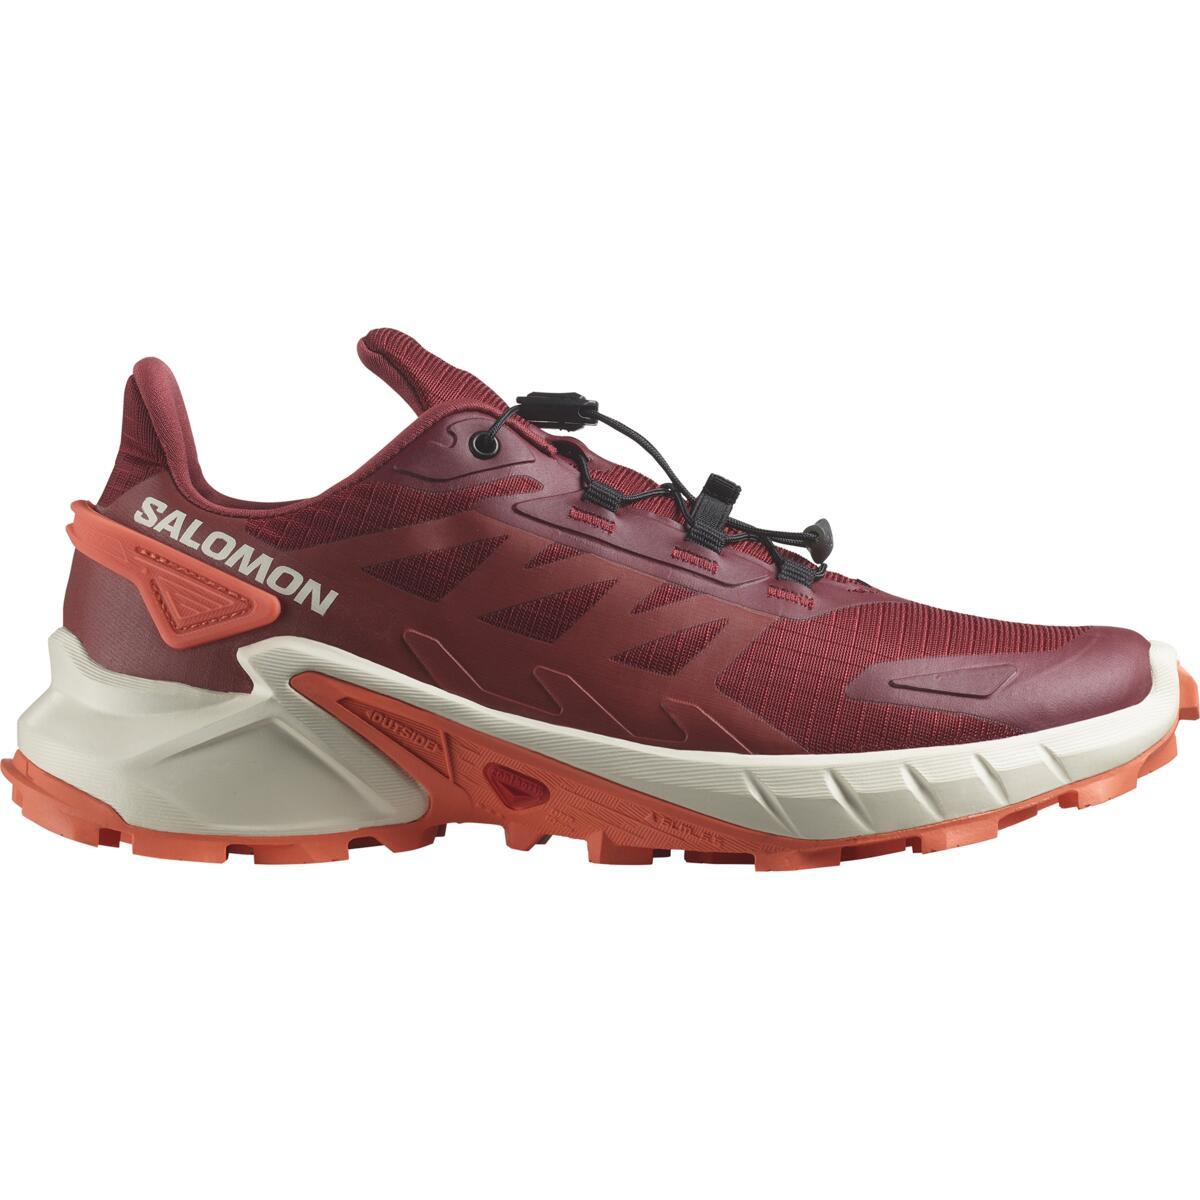 Salomon Womens Supercross 4 Trail Running Shoes - Syrah/ashes Of Roses/coral